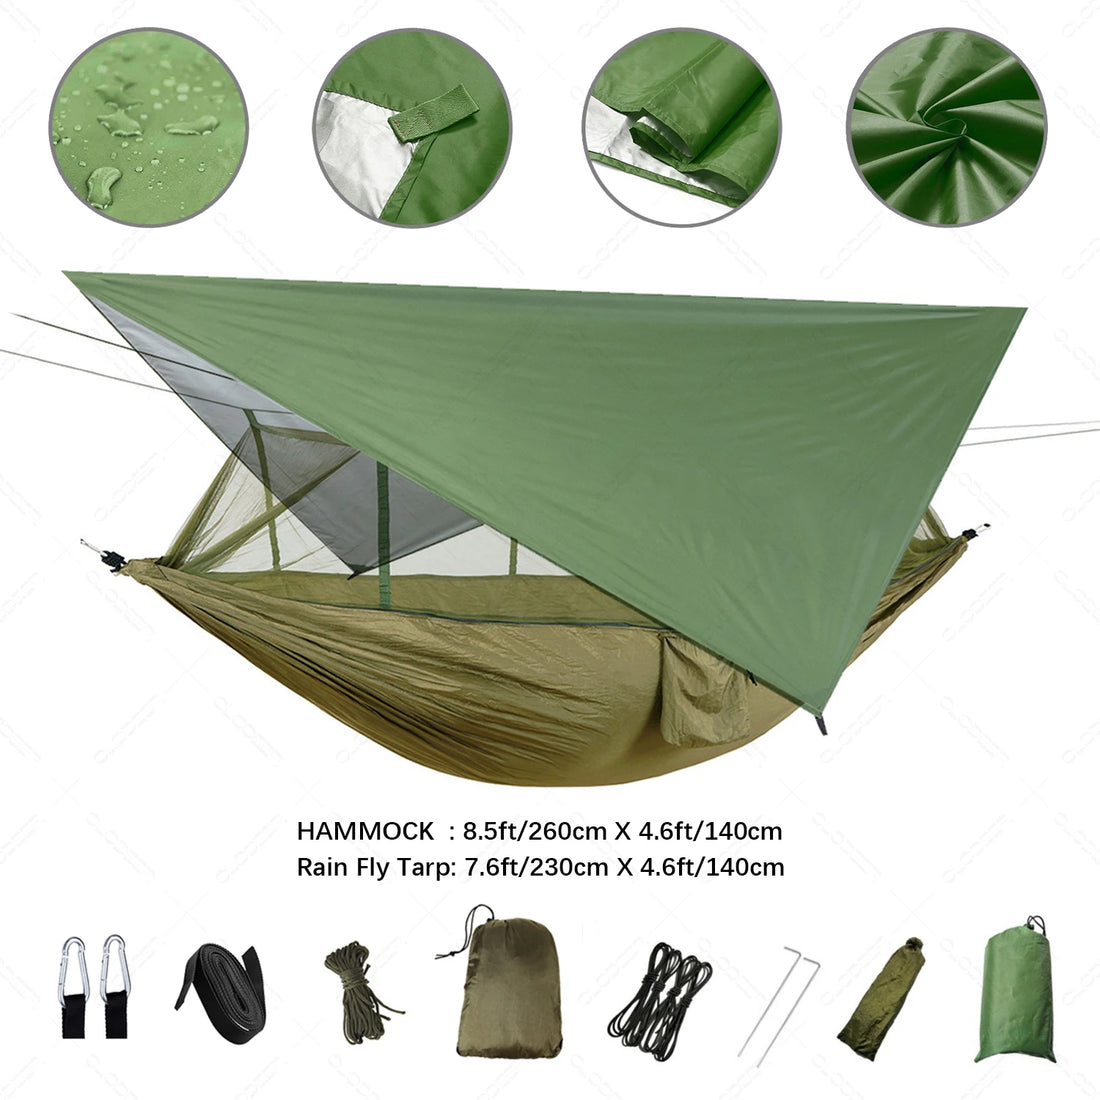  Anti Outdoor Camping Hammock With Mosquito Net And Rain Tent Equipment Supplies Shelters Camp Bed Survival Portable Hammock